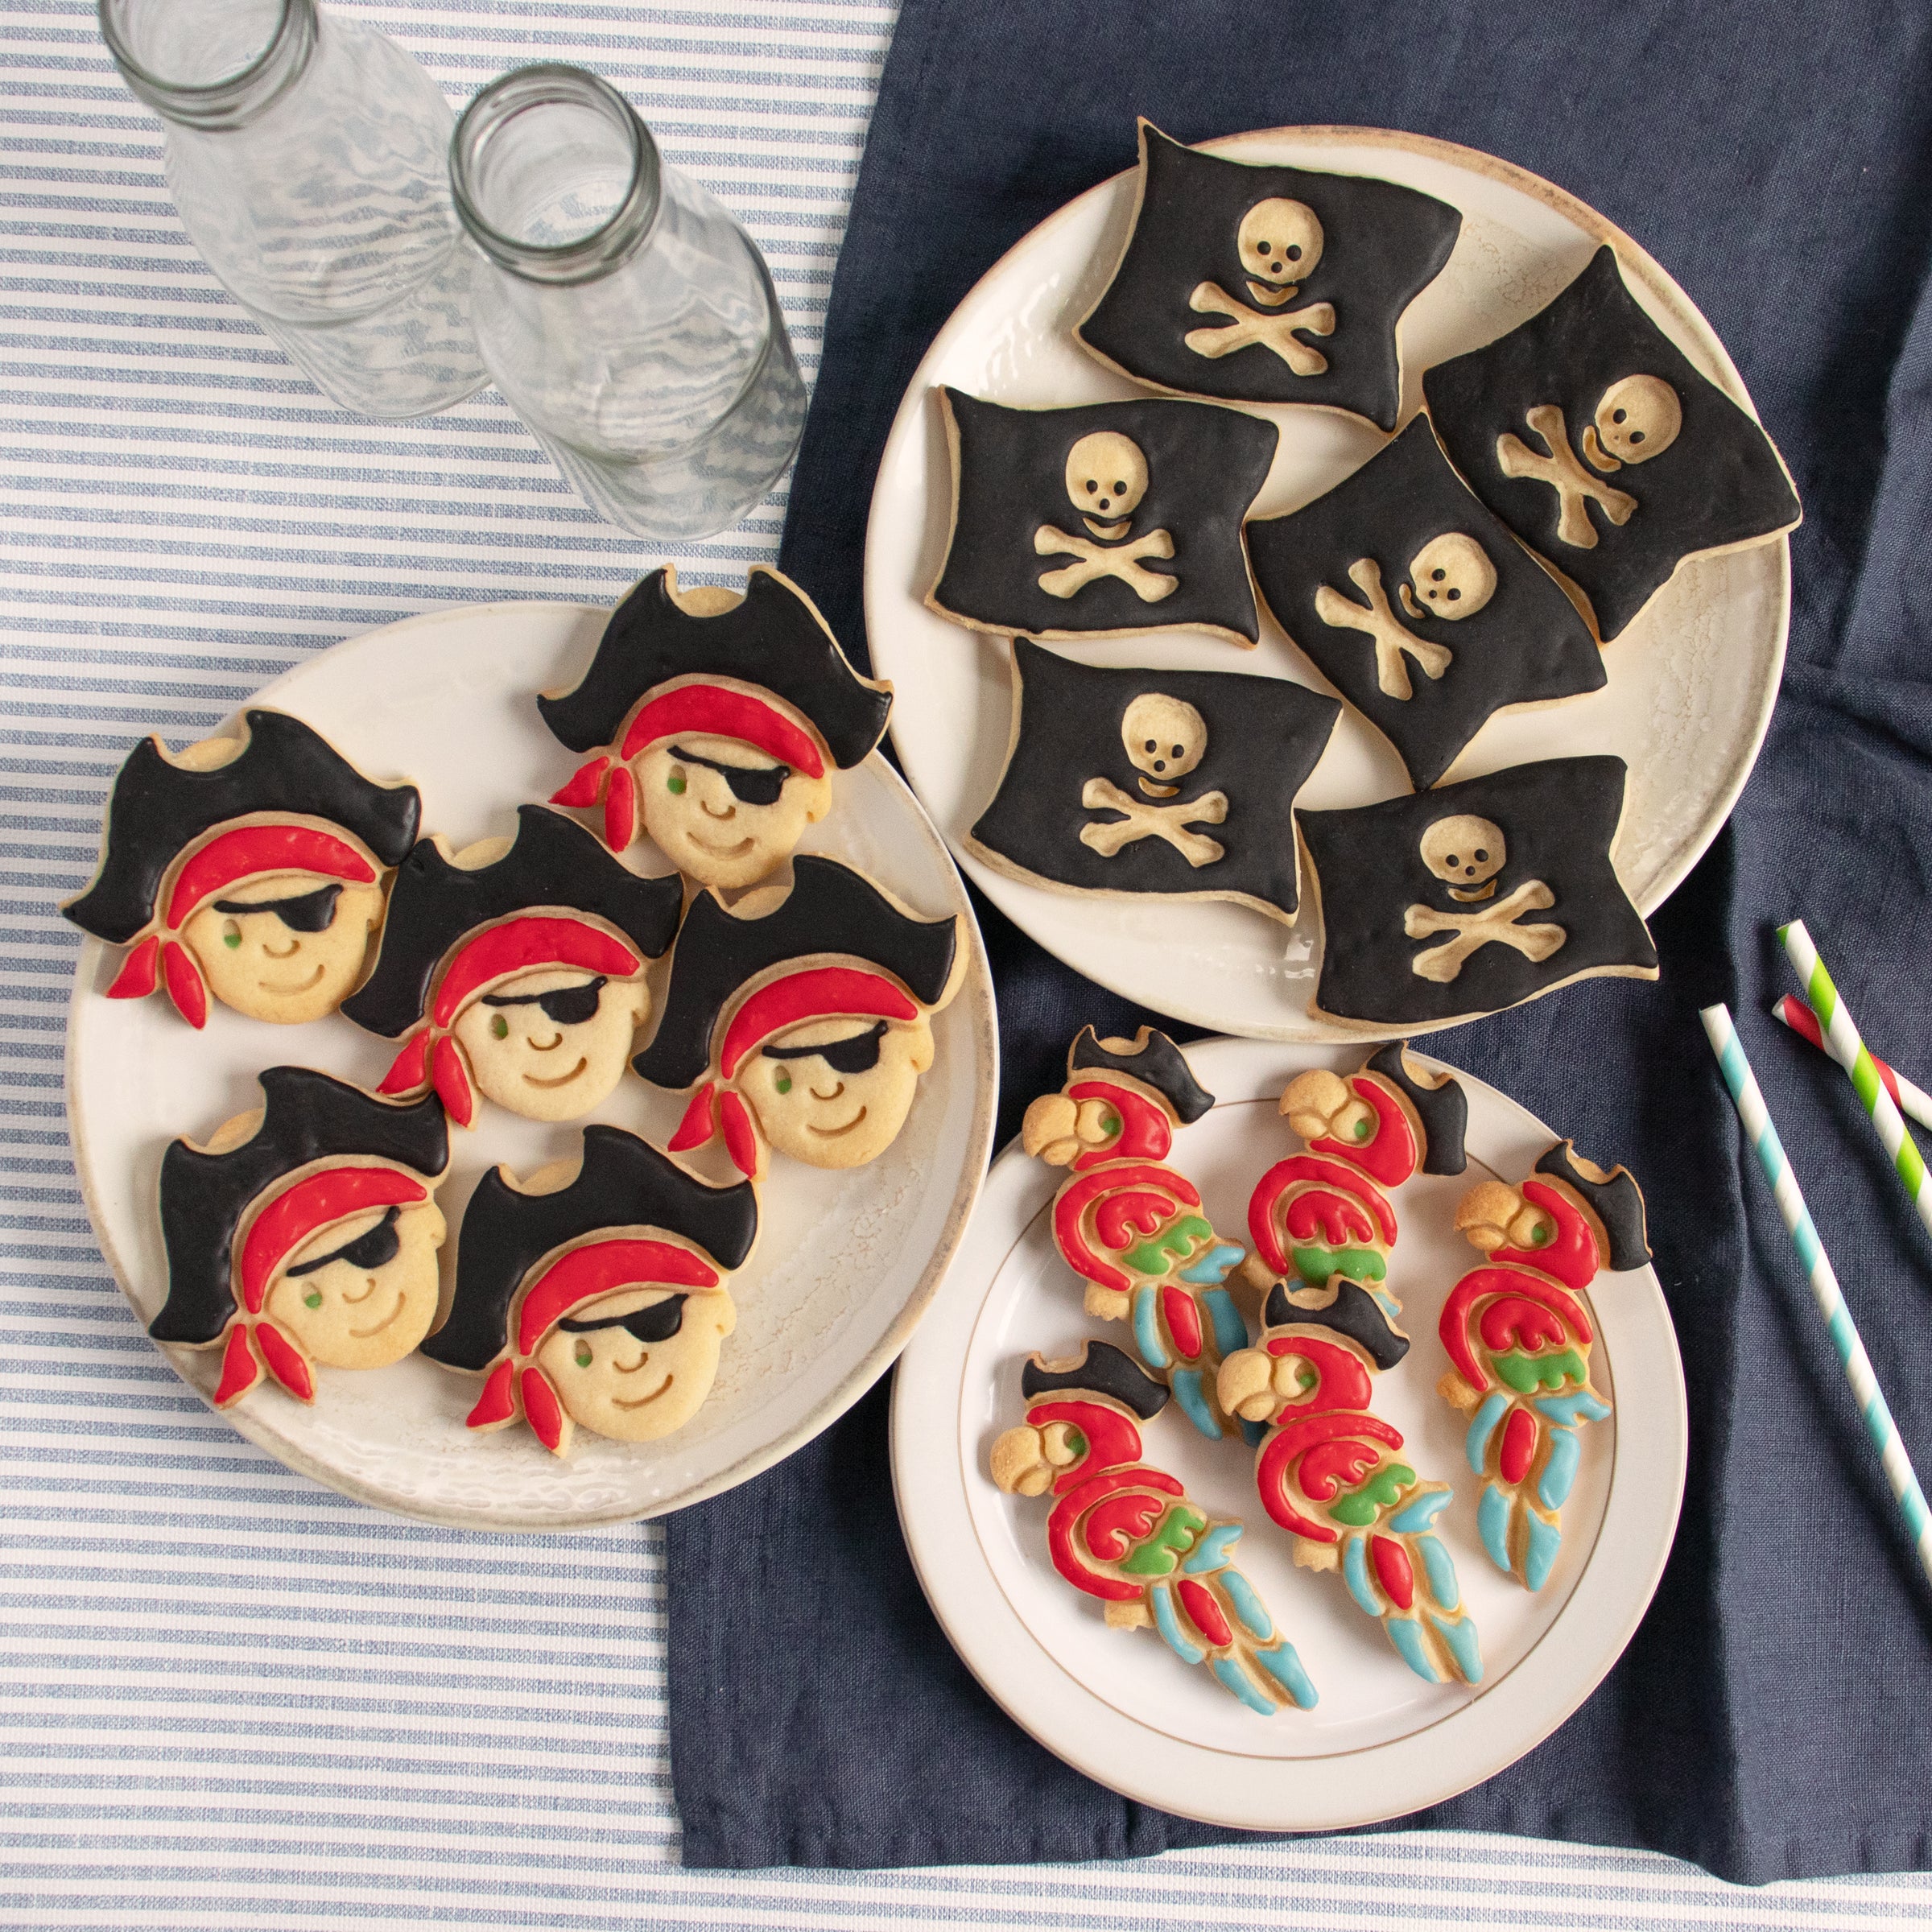 Set of 3 Cookie designs: Pirate Boy, Pirate Flag, Pirate Parrot